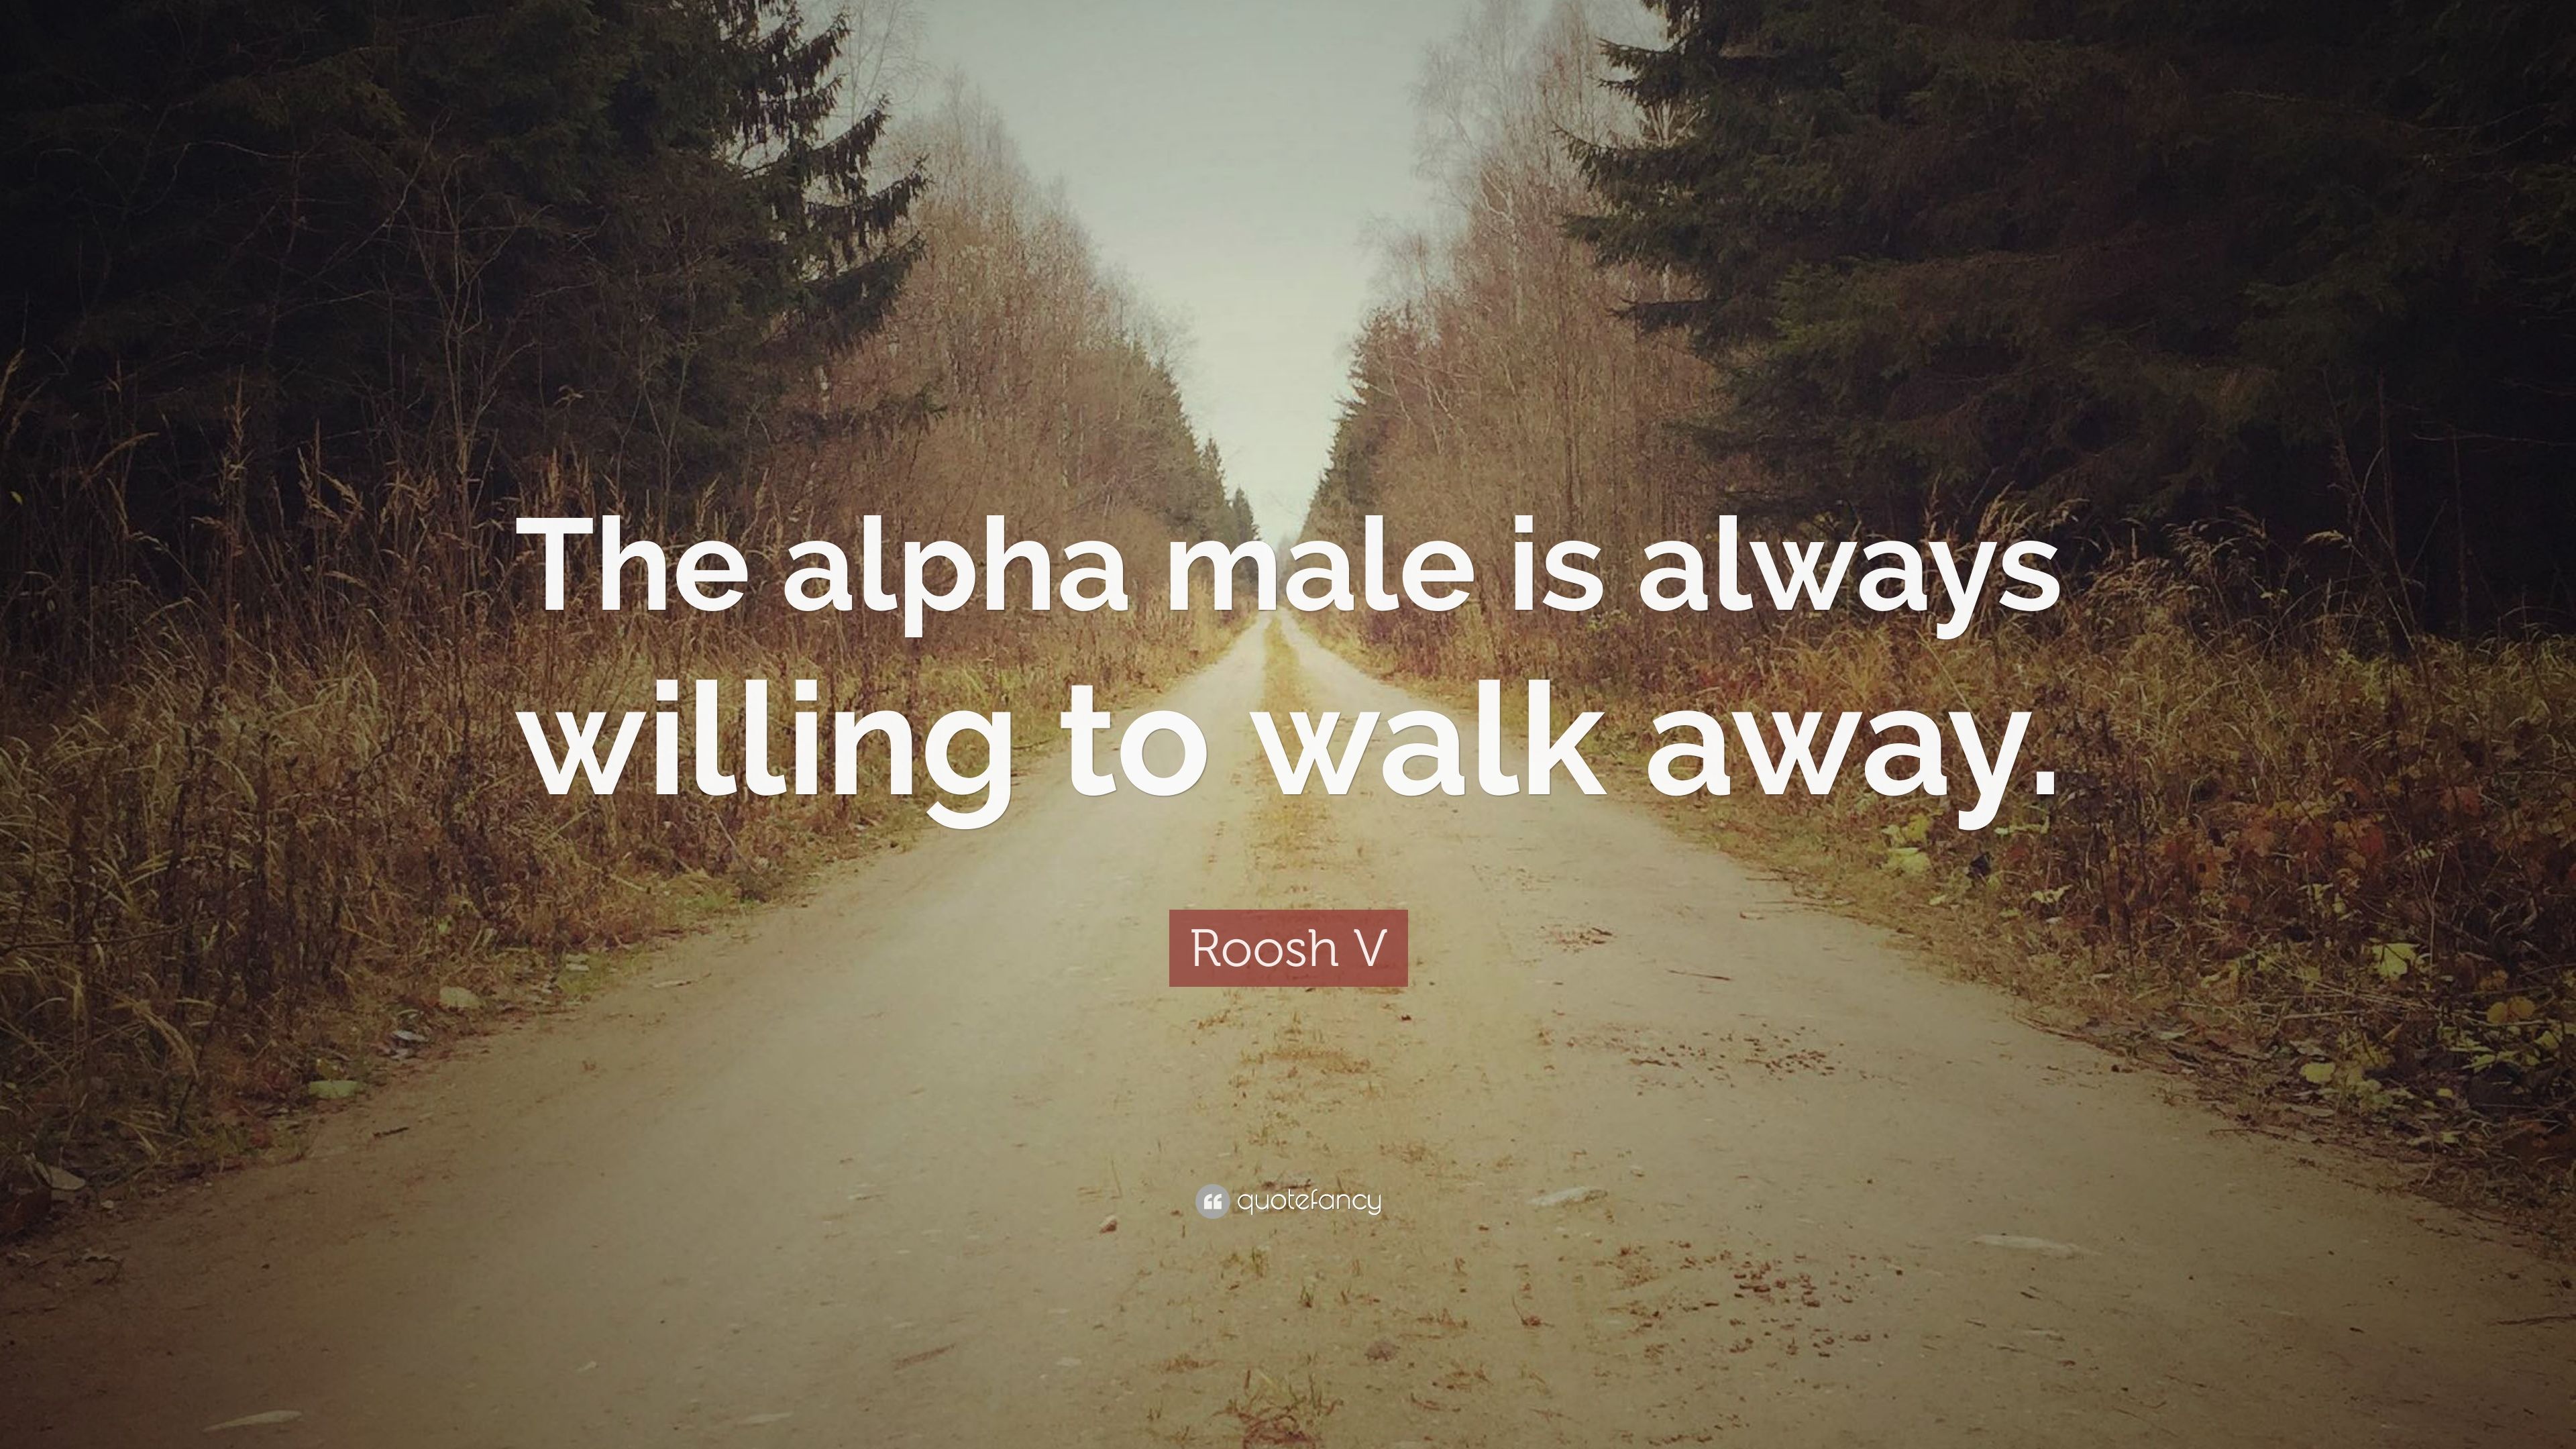 Roosh V Quote: “The alpha male is always willing to walk away.” 7